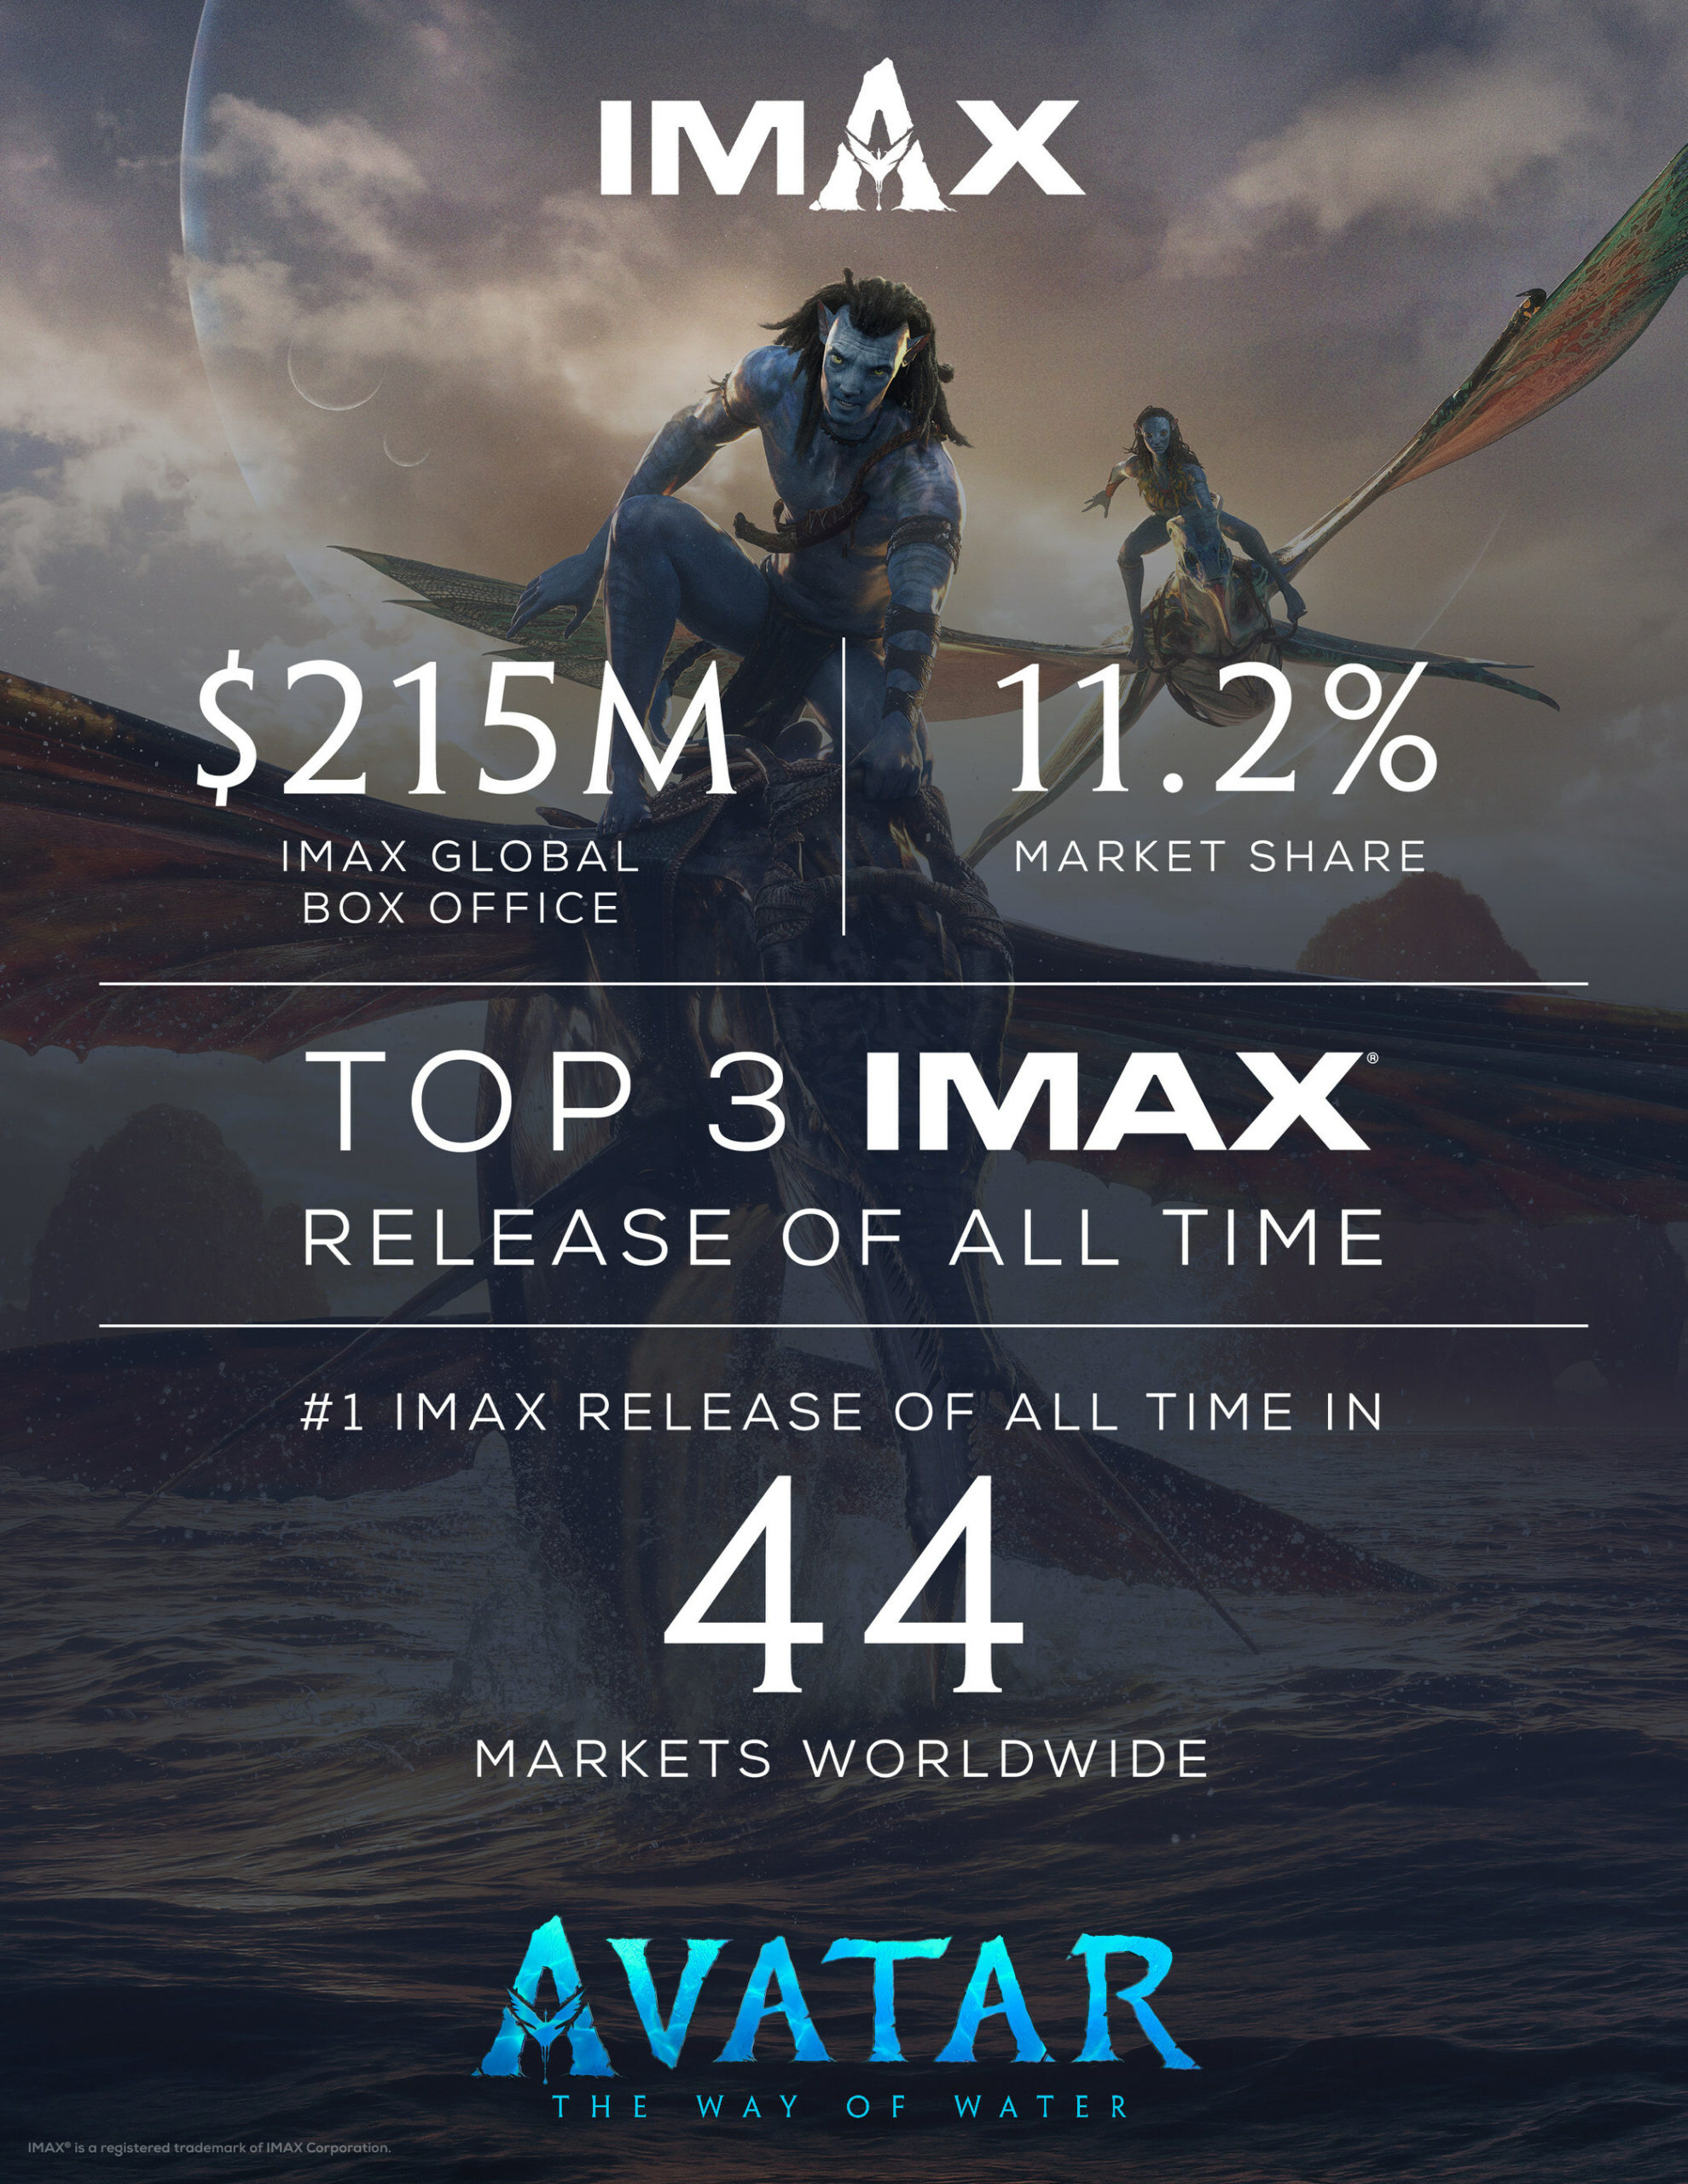 Avatar: The Way of Water Hits Top Three IMAX Releases of All Time with  $215M - Boxoffice